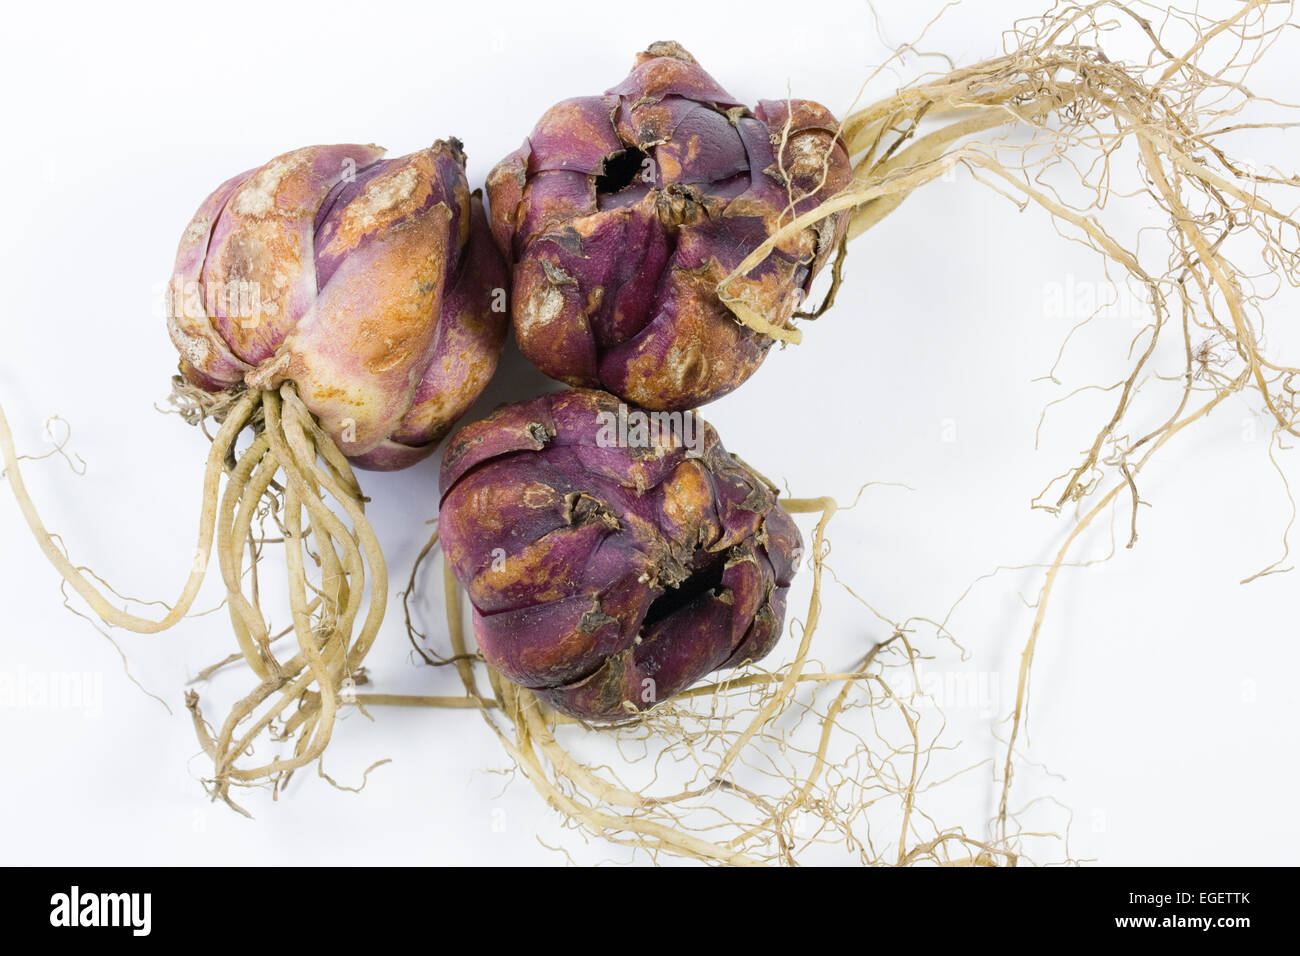 Lily bulbs on a white background ready for planting. Stock Photo